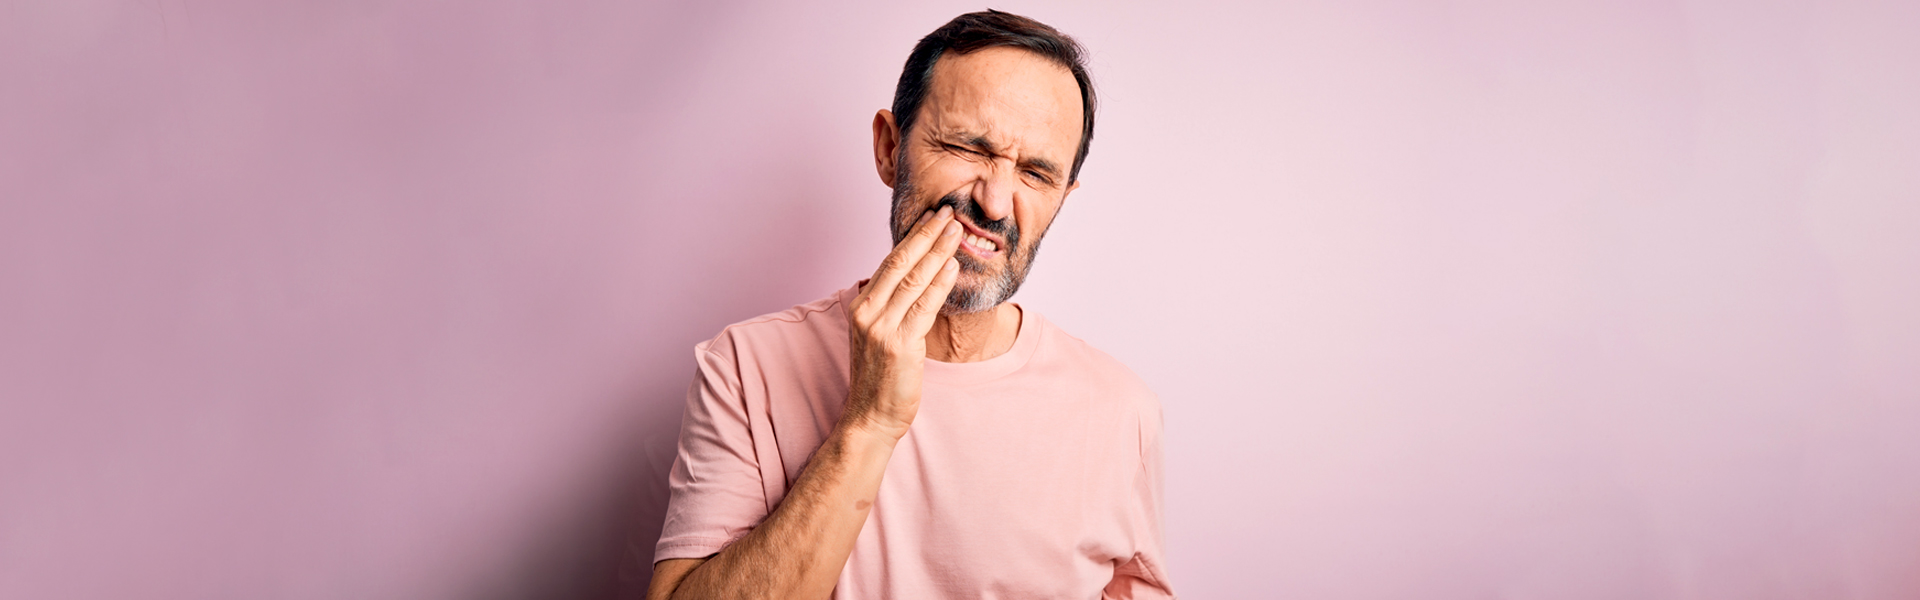 Treatment for Toothaches and Tooth Pain in Spring, Richmond, Humble and Katy TX